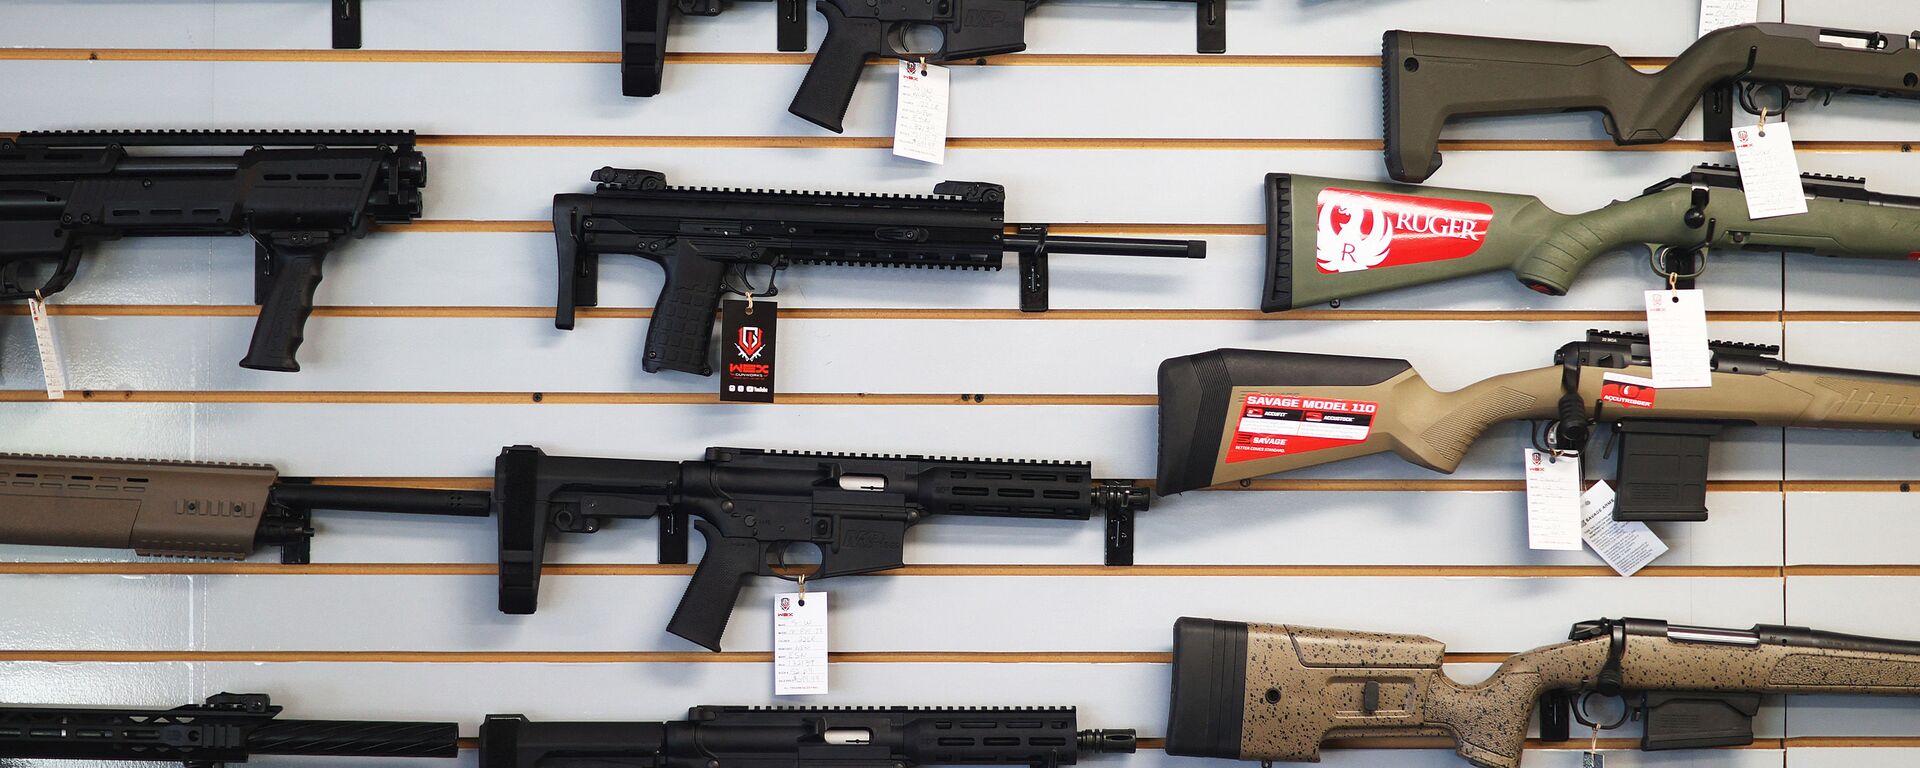 DELRAY BEACH, FLORIDA - MARCH 24: Weapons for sale hang on the wall at WEX Gunworks on March 24, 2021 in Delray Beach, Florida. U.S. President Joe Biden has called on lawmakers to “immediately pass” legislation to help curb gun violence in the county.   - Sputnik International, 1920, 09.10.2023